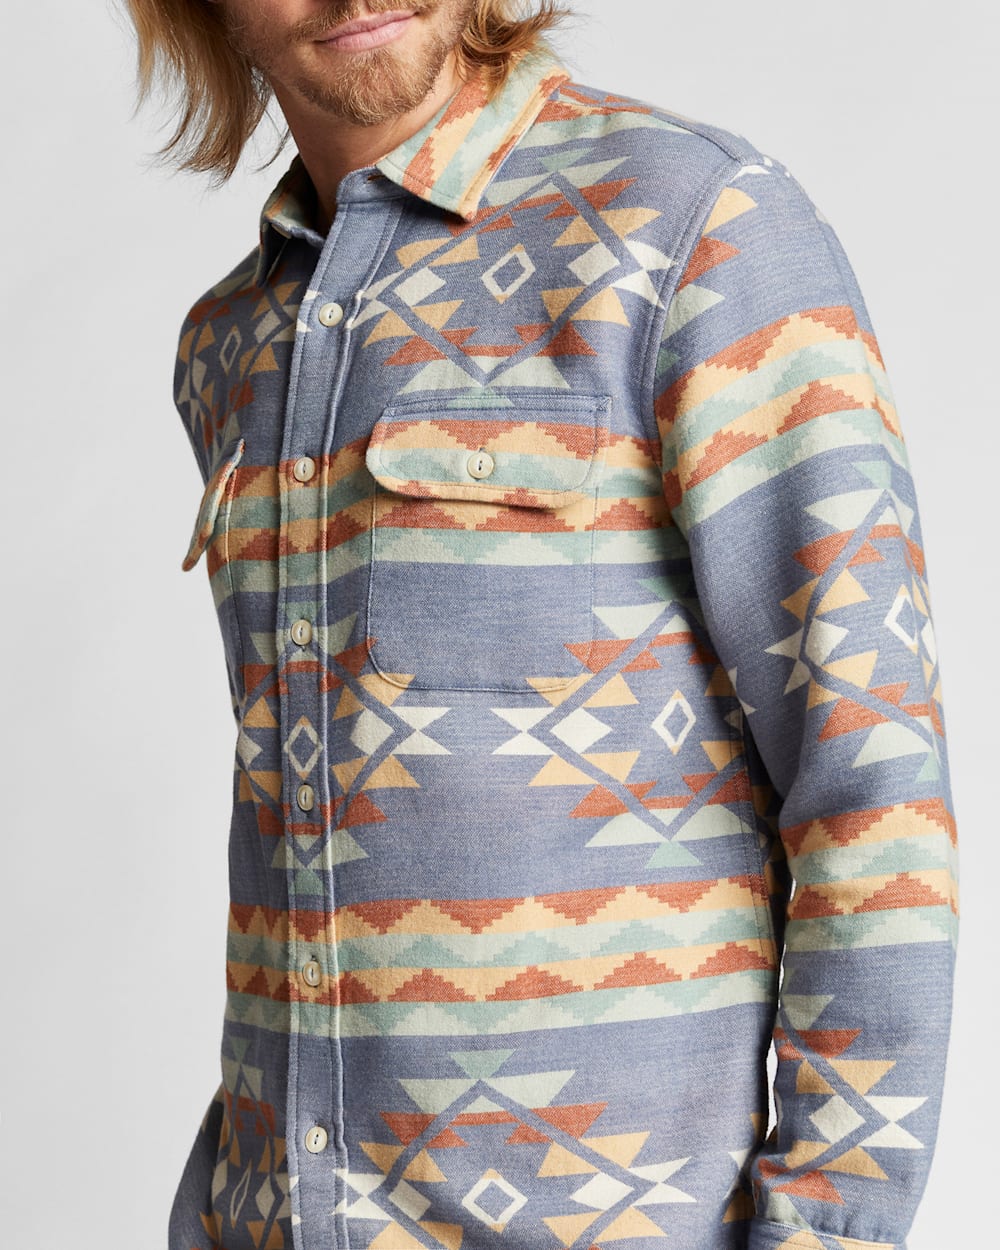 ALTERNATE VIEW OF MEN'S BEACH SHACK JACQUARD COTTON SHIRT IN BLUE/GREEN MULTI image number 5